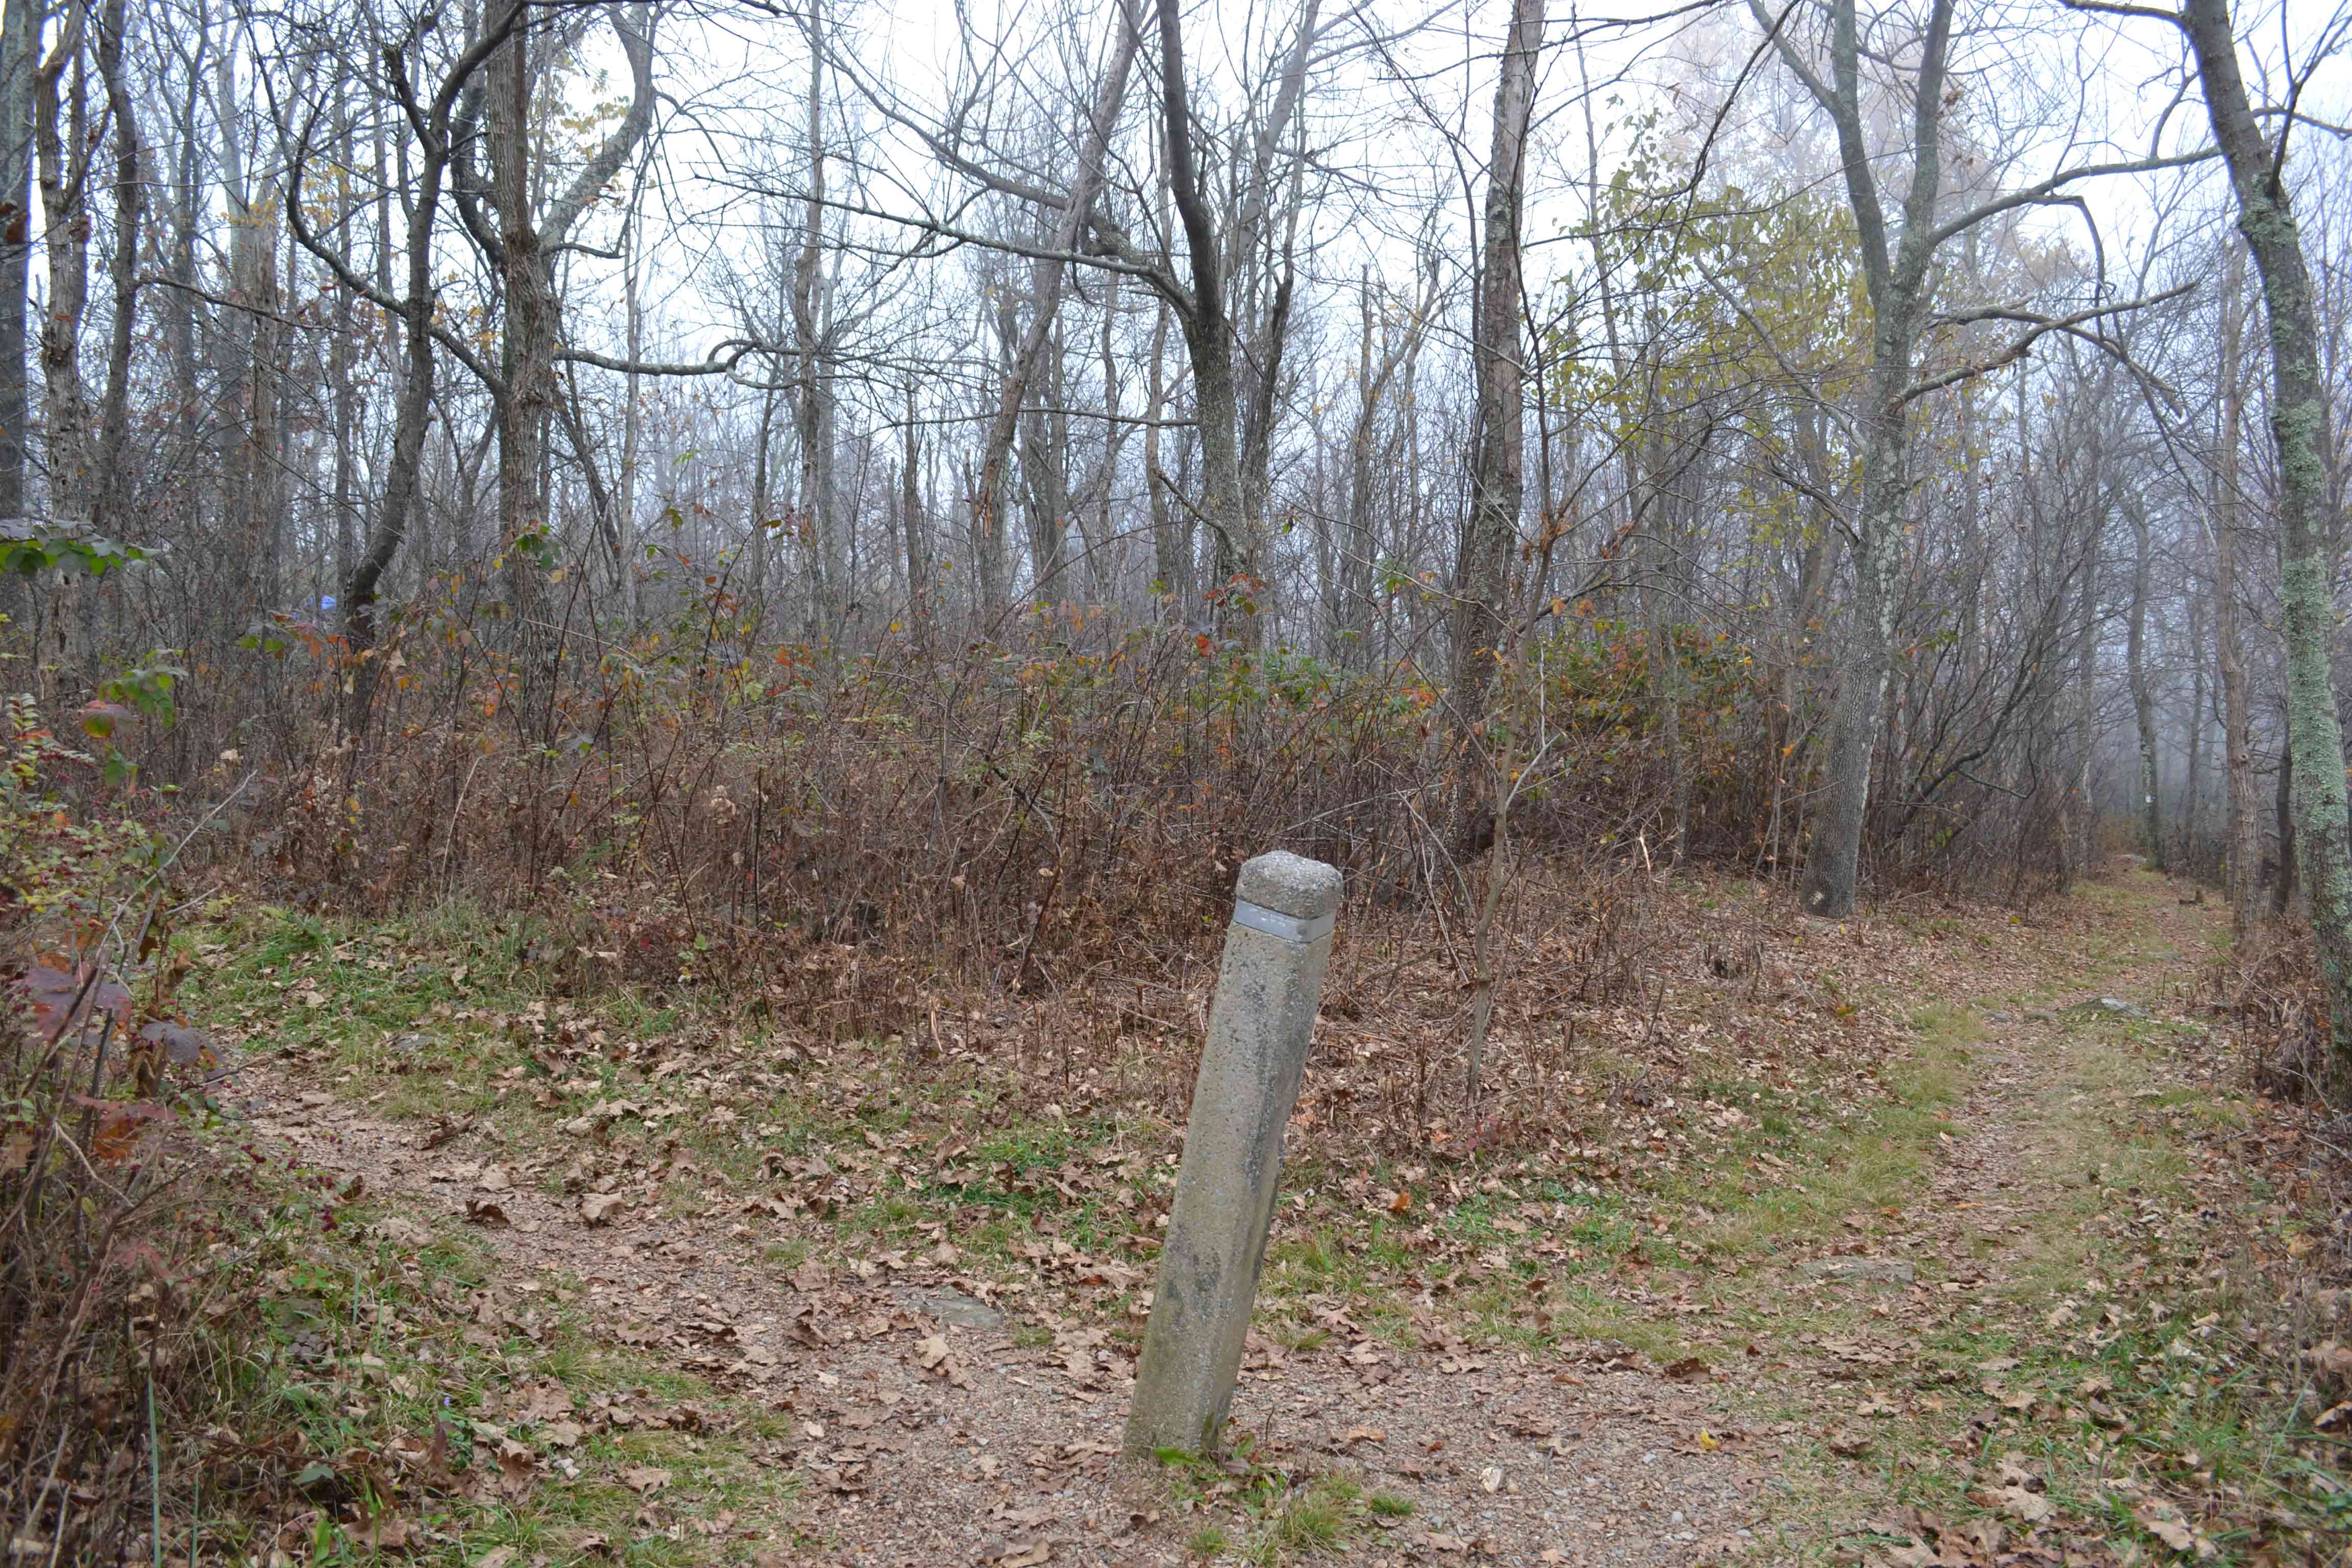 Trail post on AT denoting side trail to Loft Mountain
campground approximately 150 yds. Water available. GPS N38.24384 W78.66988
Courtesy at@rohland.org